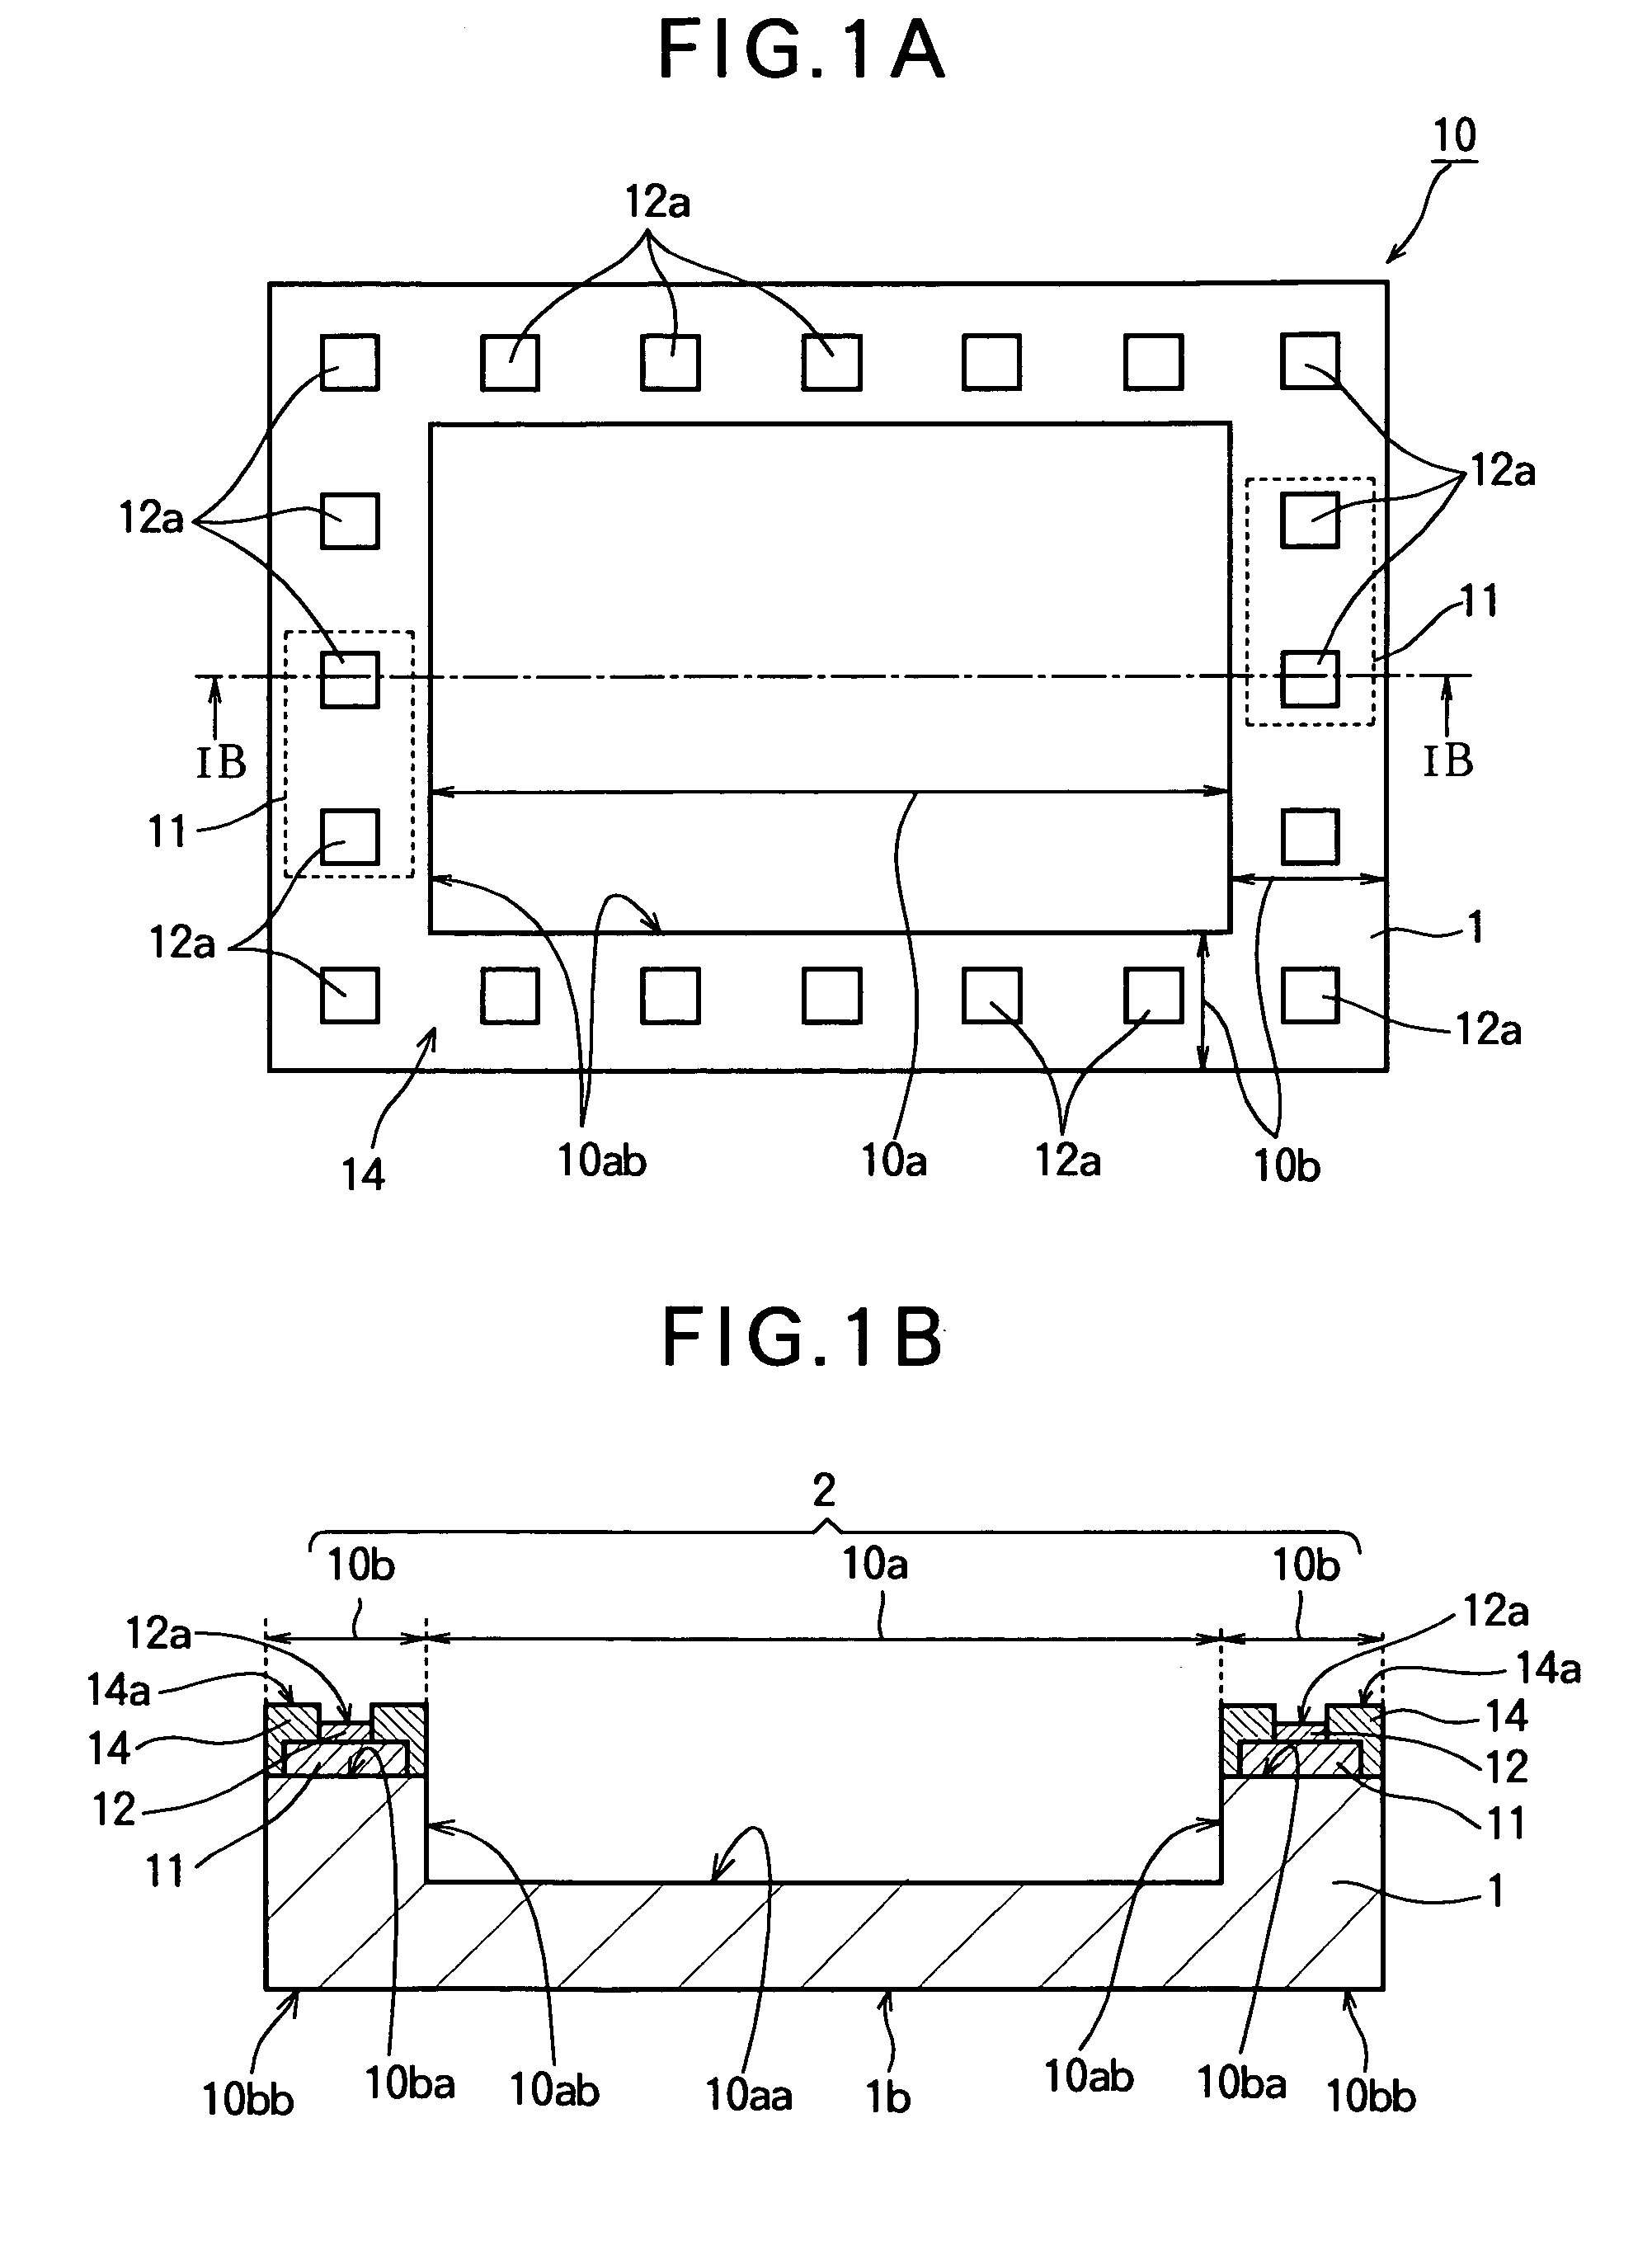 Semiconductor device having a frame portion and an opening portion with mountable semiconductor chips therein